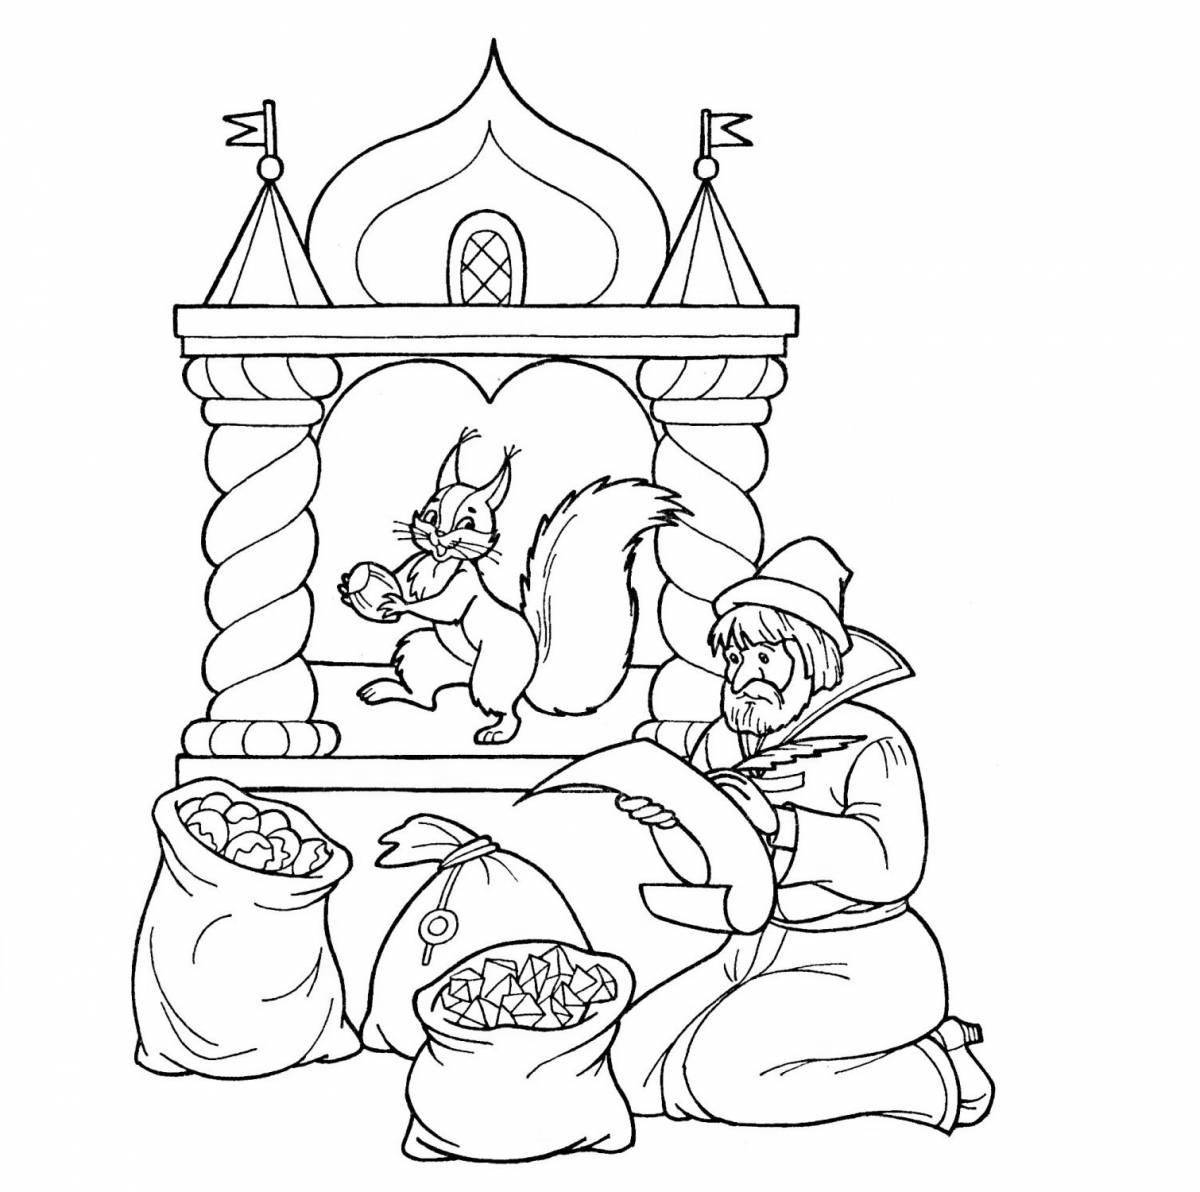 A fascinating coloring book based on fairy tales